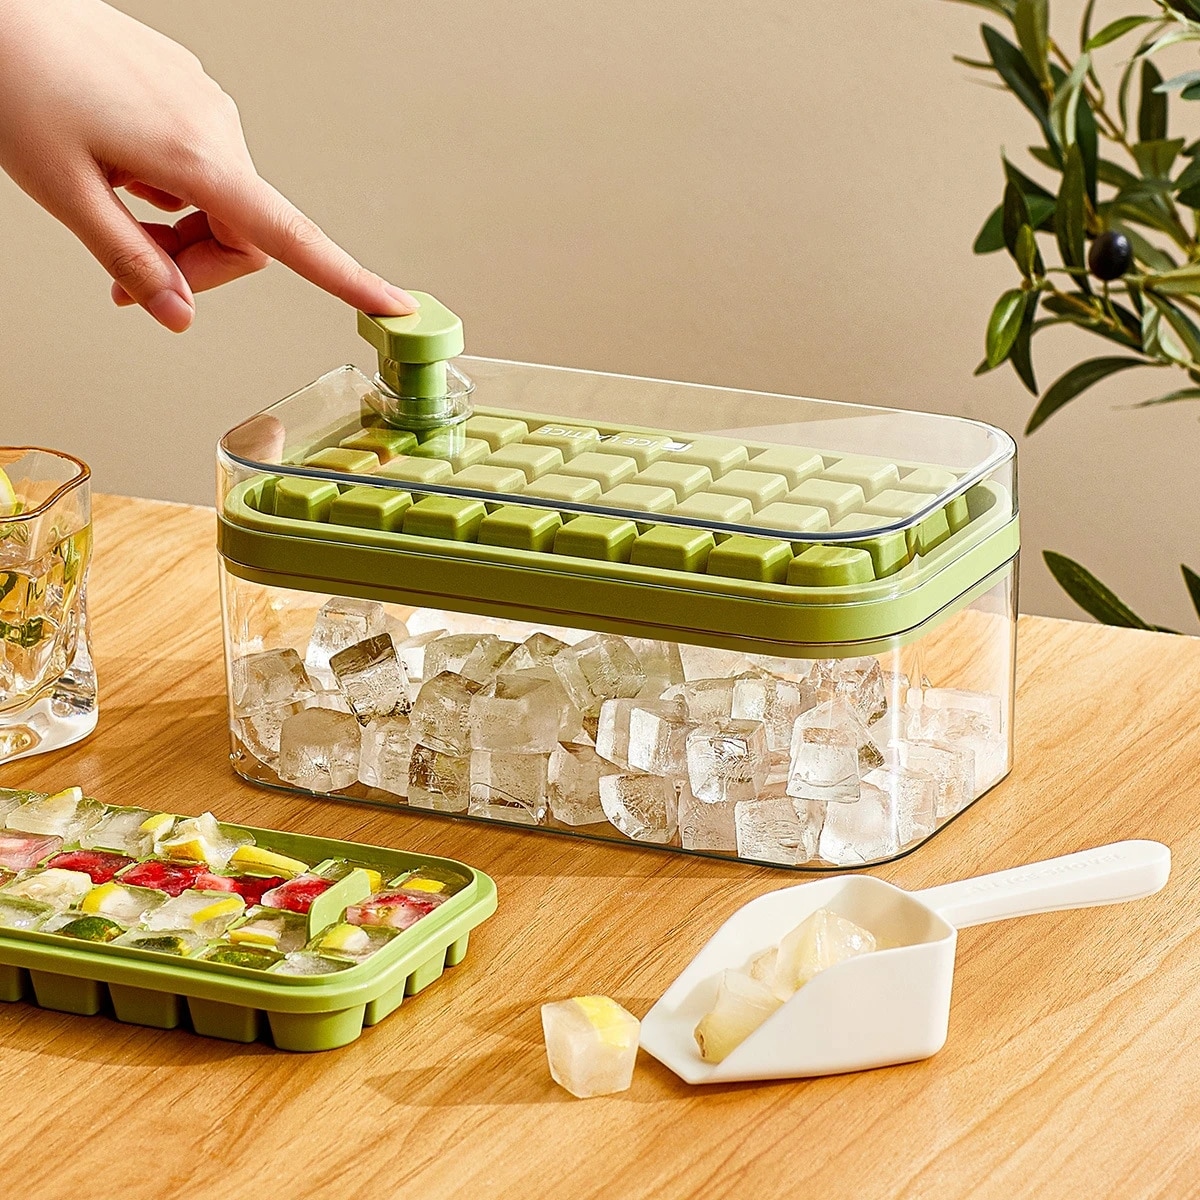 One-button Ice Mold Box